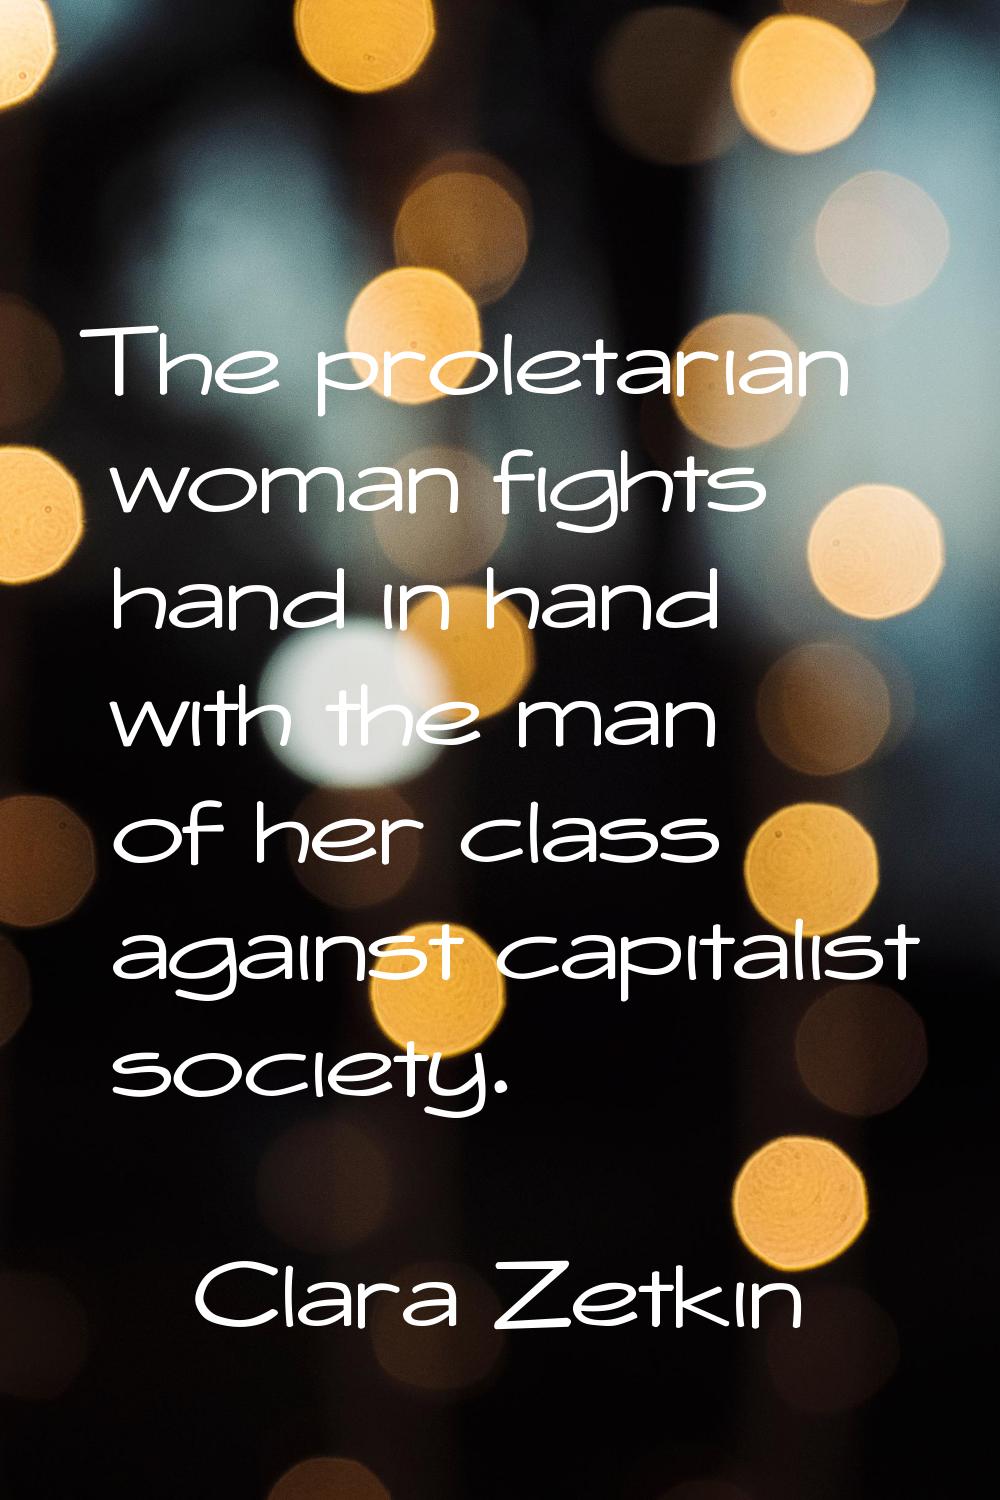 The proletarian woman fights hand in hand with the man of her class against capitalist society.